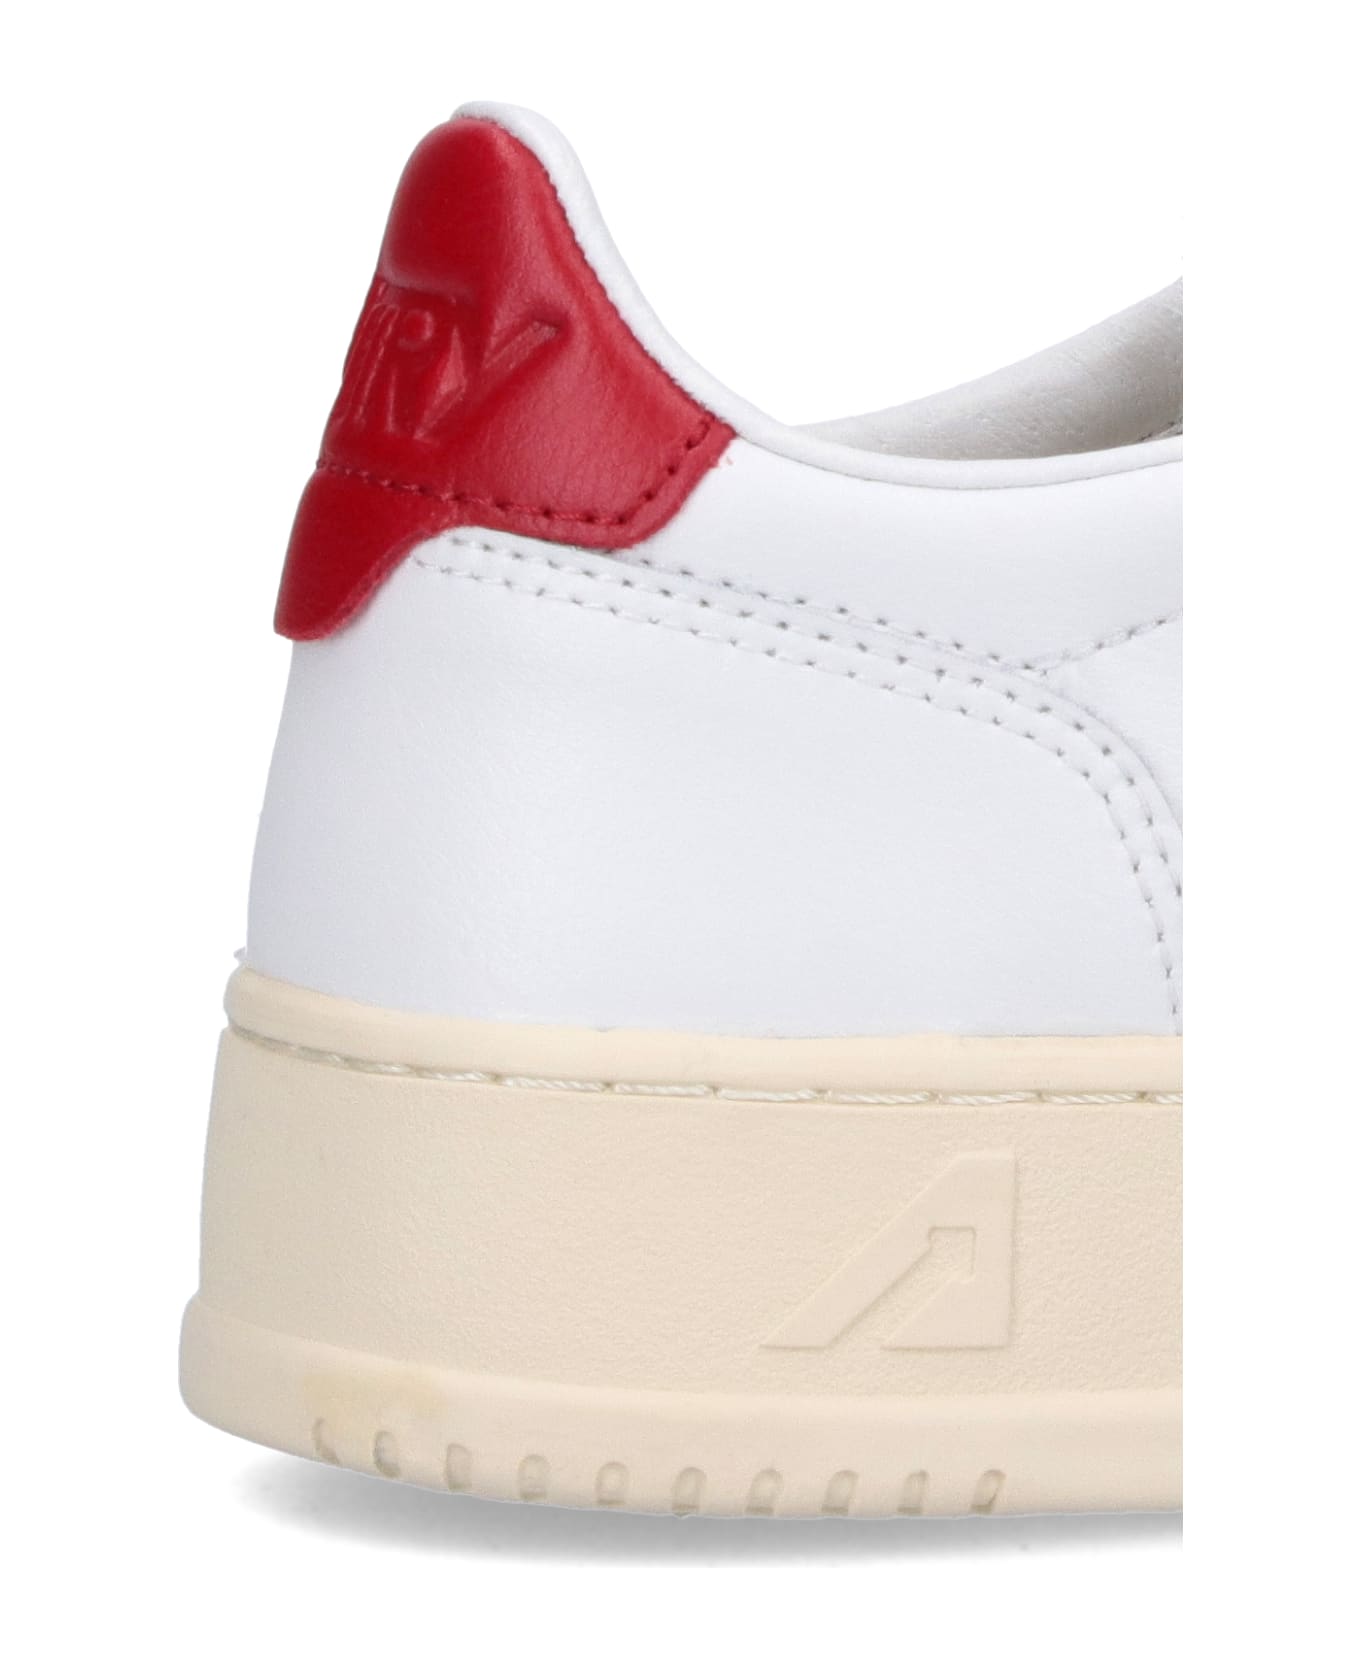 Autry Low Sneakers 'medalist' - White Red